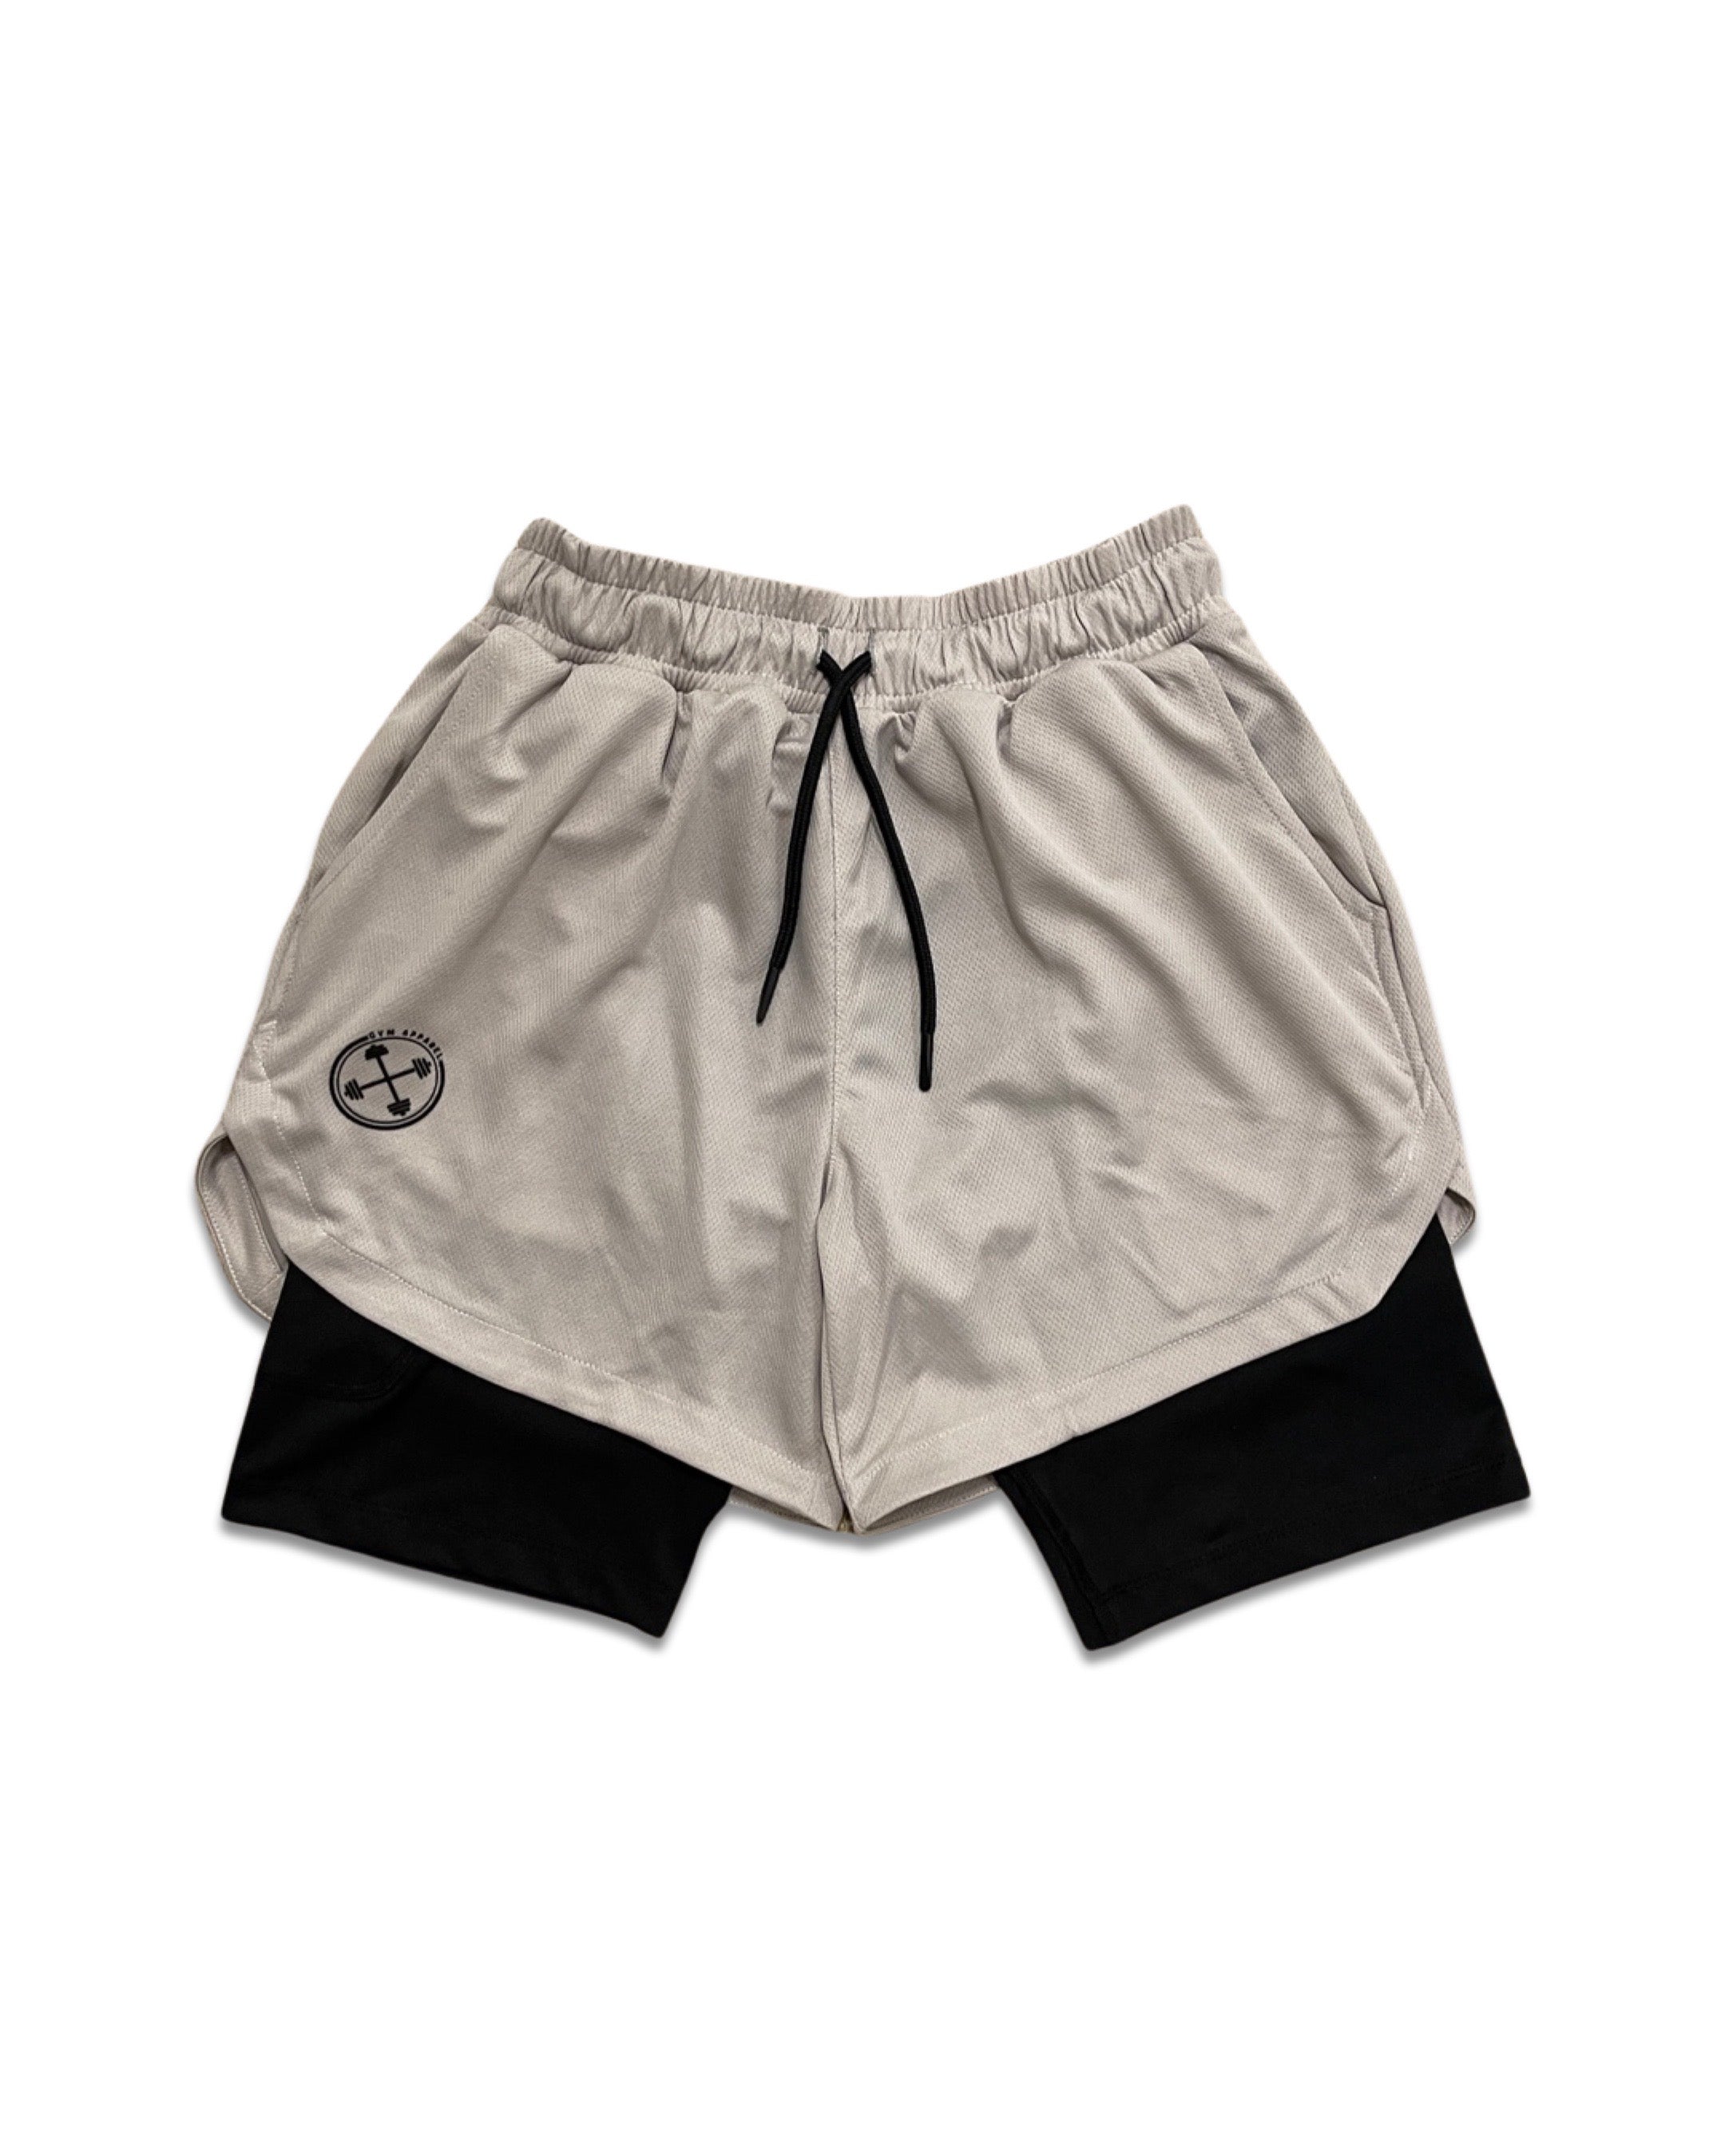 2 in 1 Functional Training Shorts [Limited Colors] - Shorts - Gym Apparel Egypt